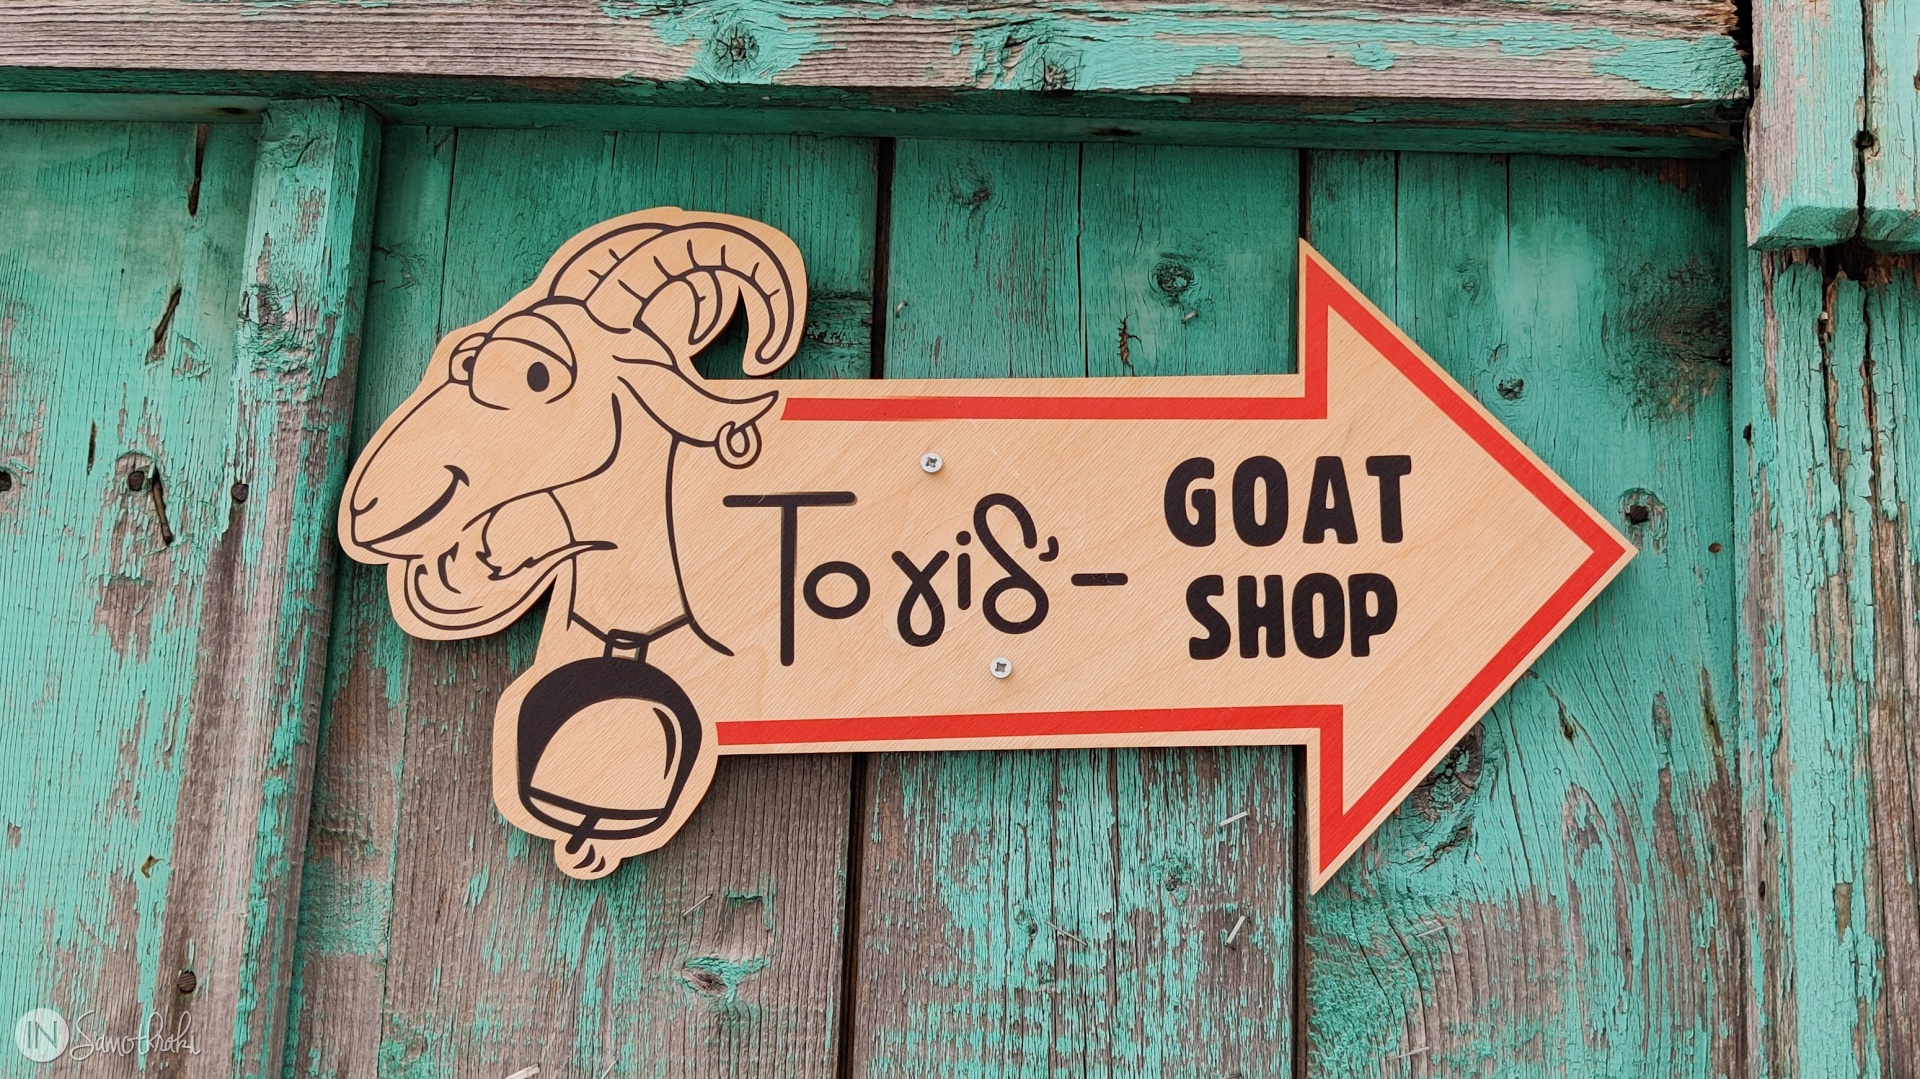 To Gid' - The Goat Shop